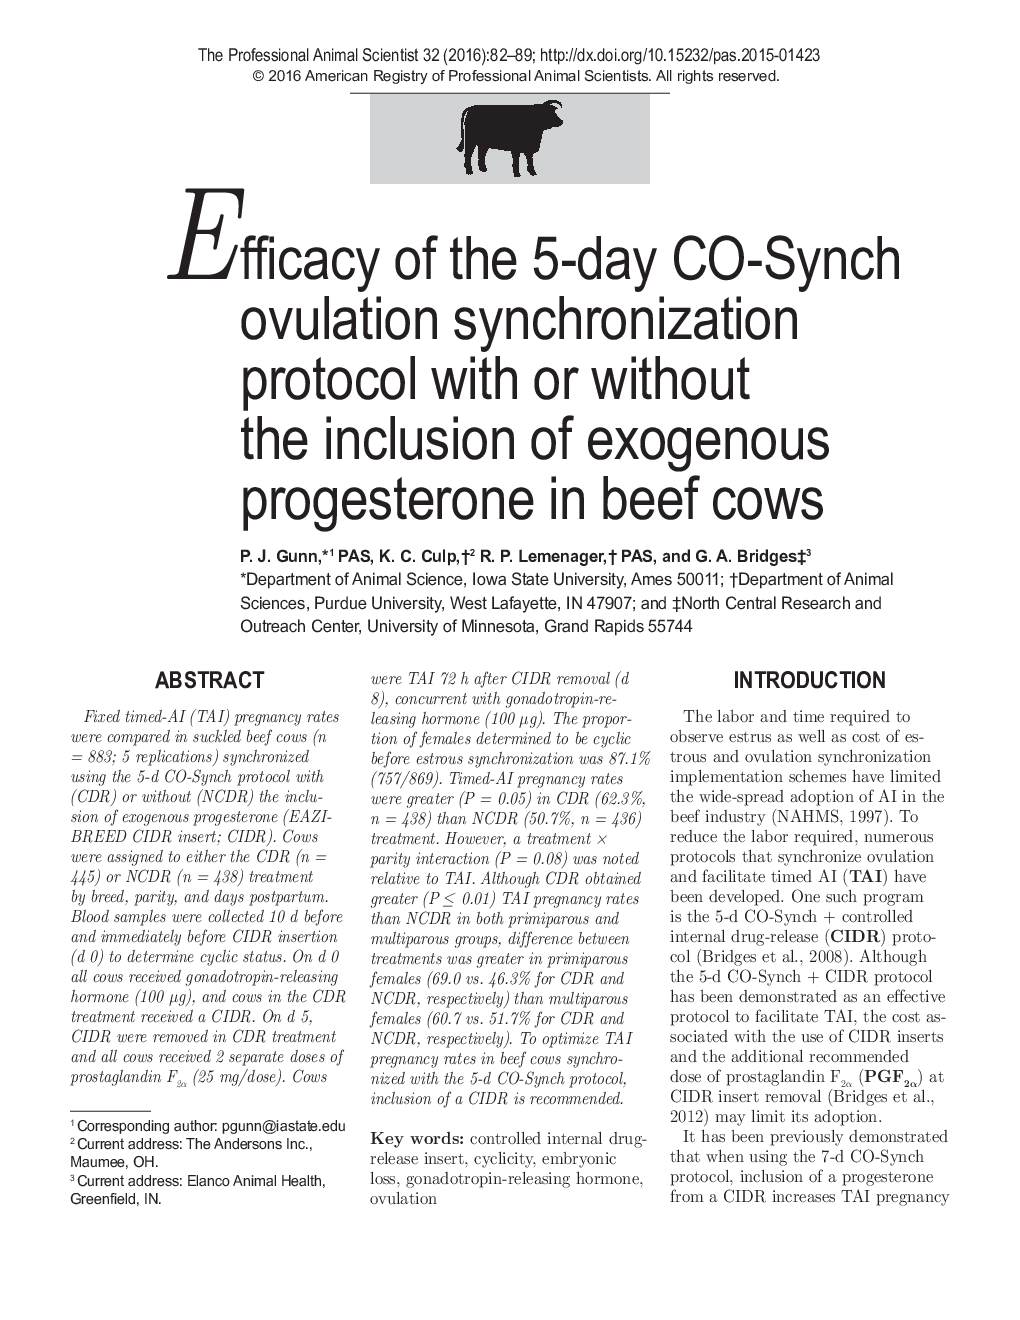 Efficacy of the 5-day CO-Synch ovulation synchronization protocol with or without the inclusion of exogenous progesterone in beef cows